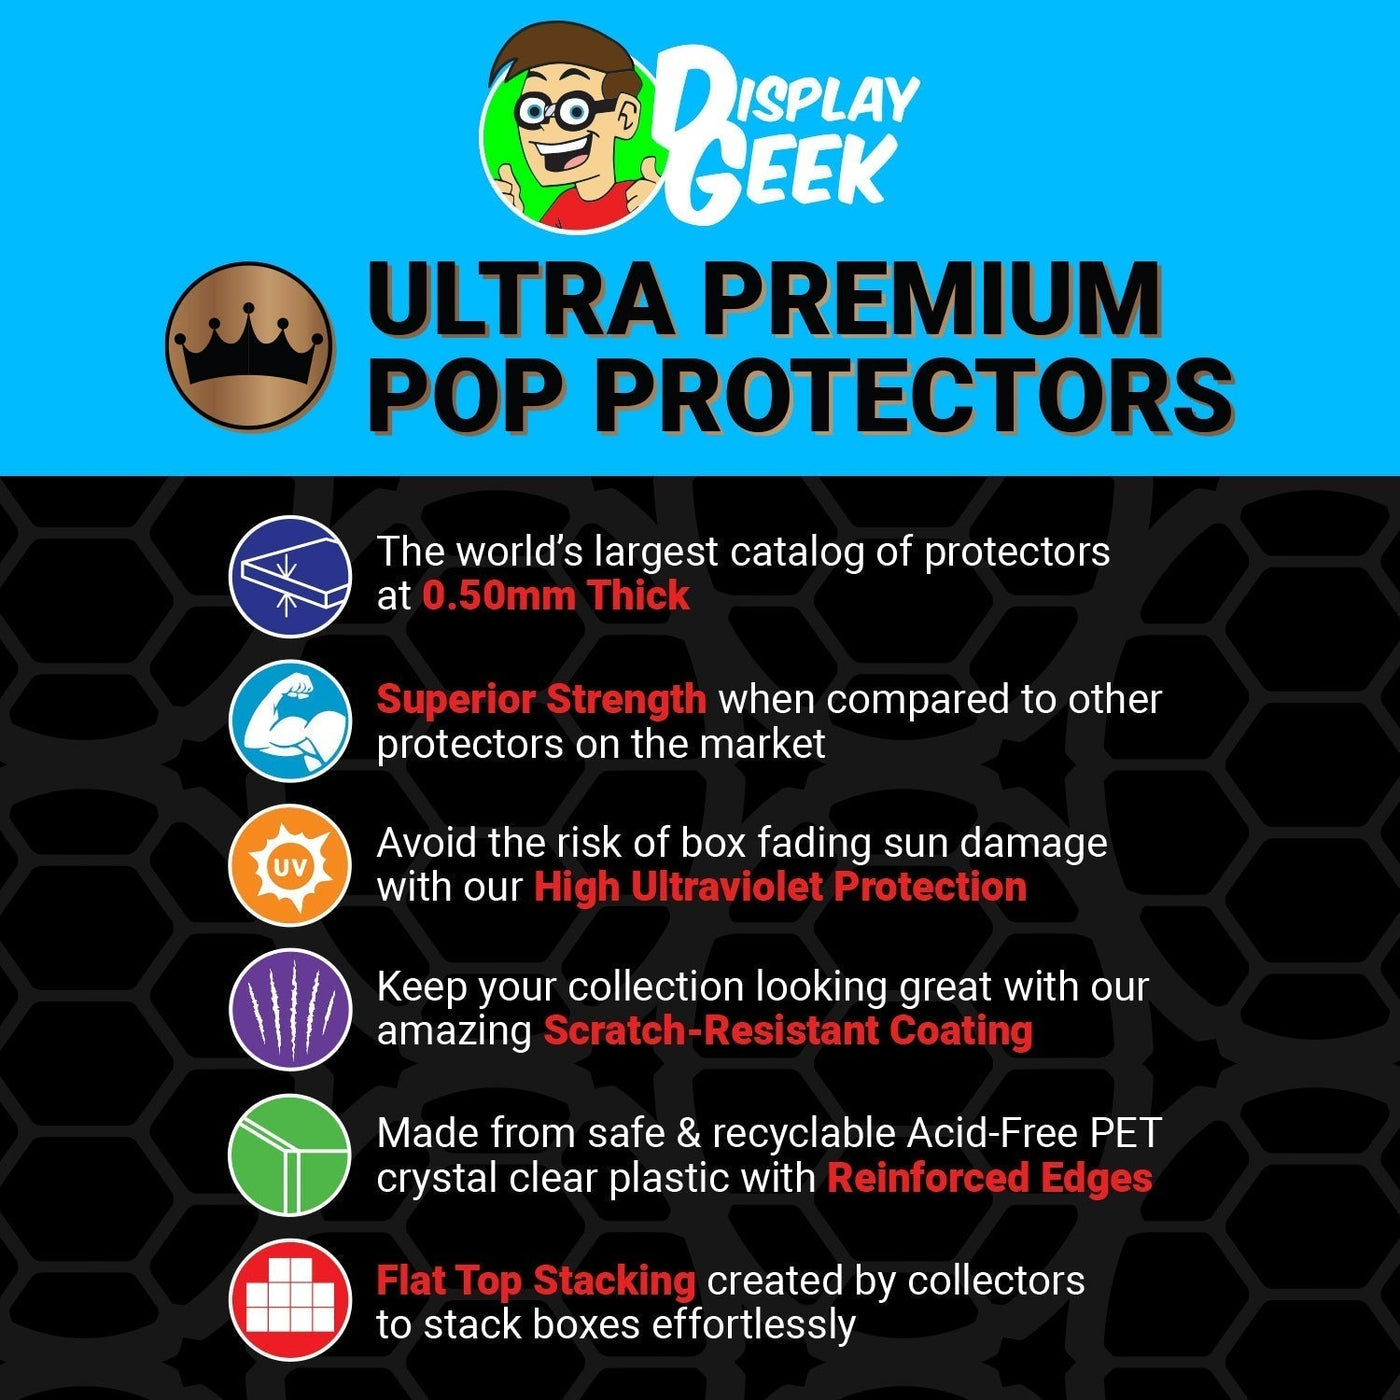 Pop Protector for Sinister Six Sandman #1015 Funko Pop Deluxe on The Protector Guide App by Display Geek